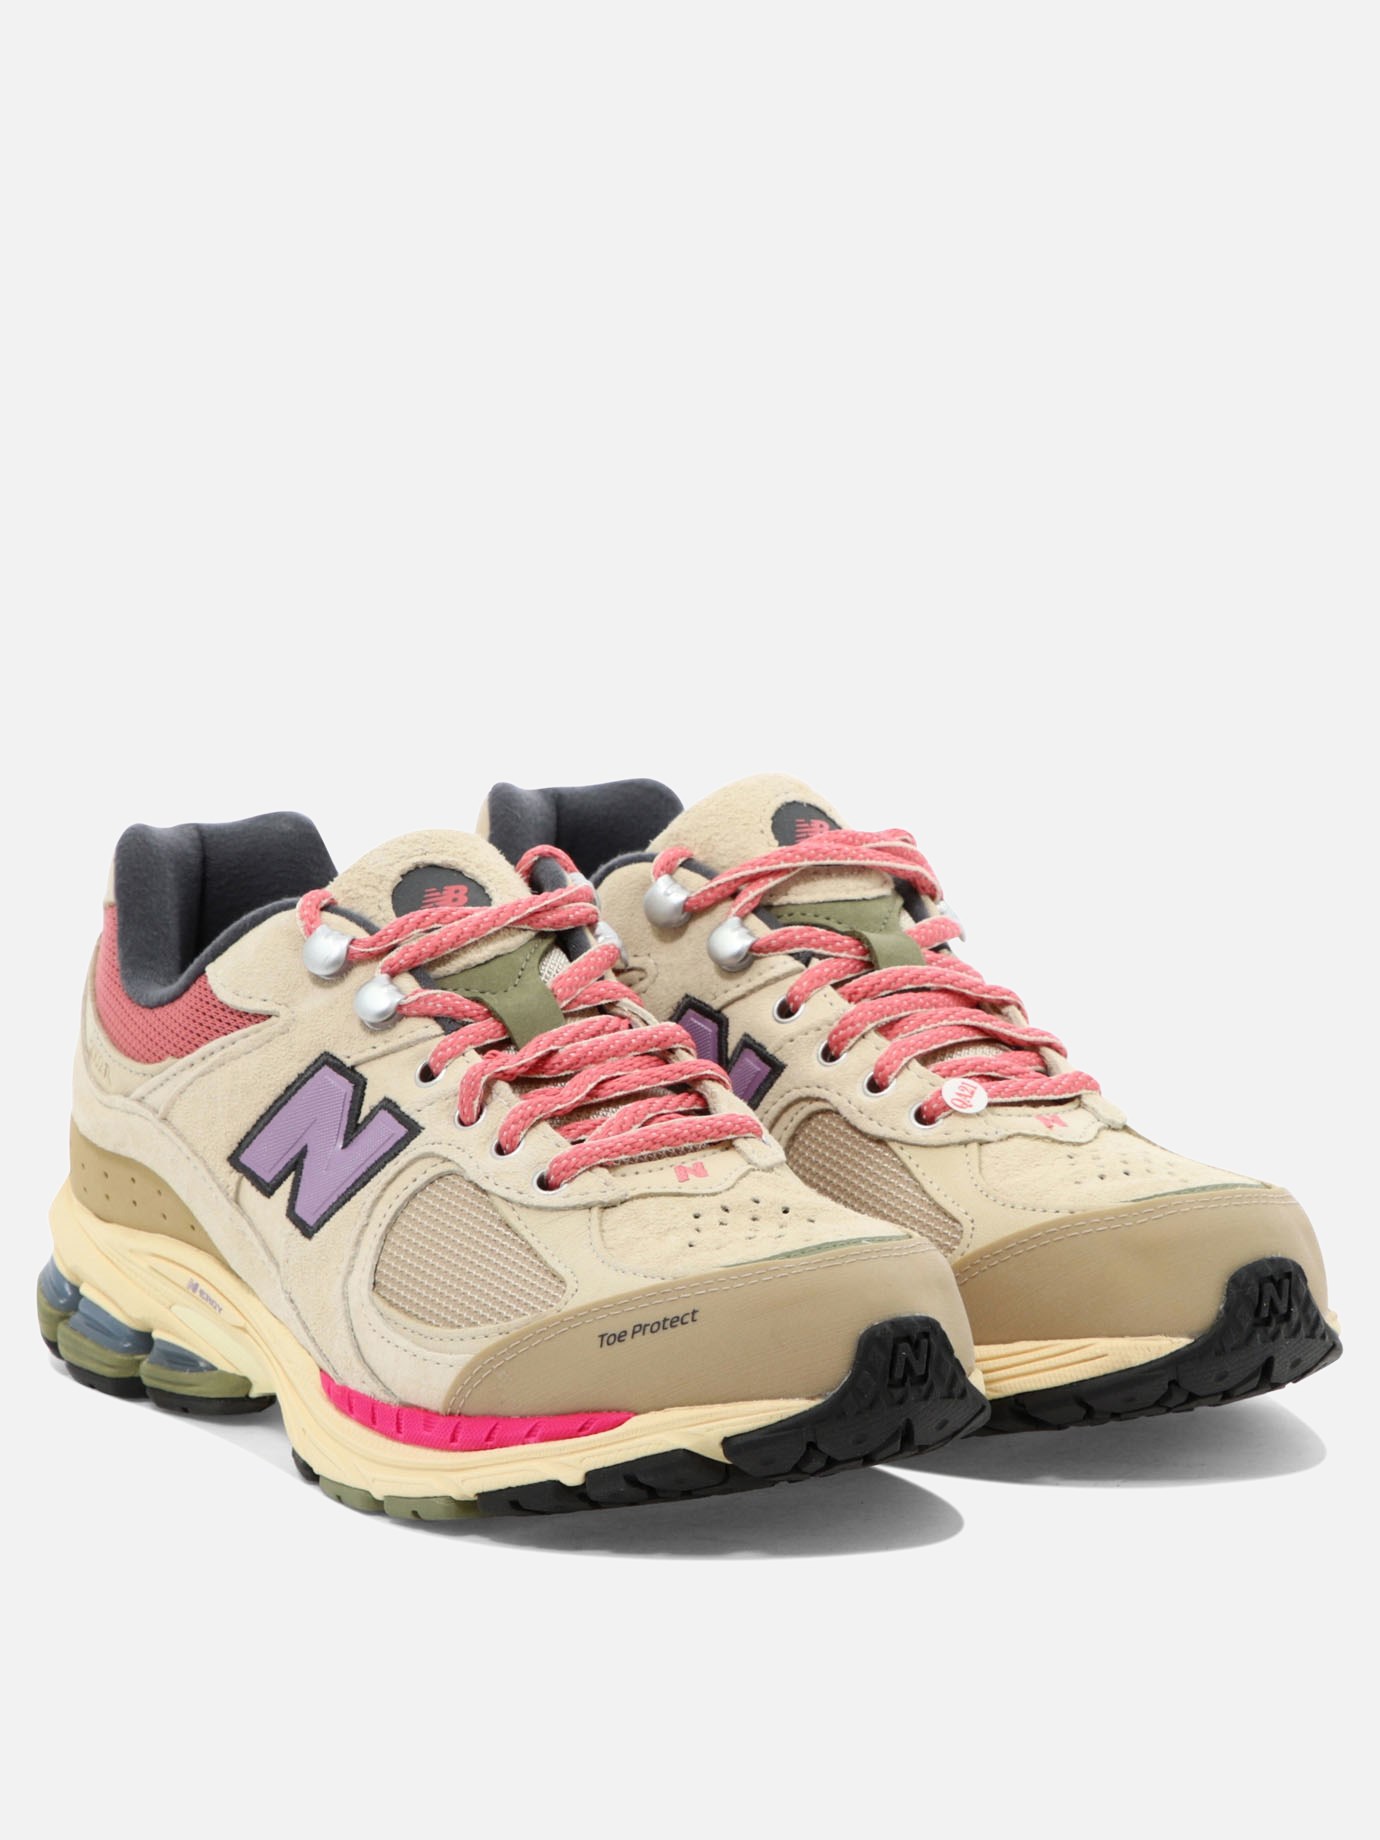 Sneaker  2002R  by New Balance